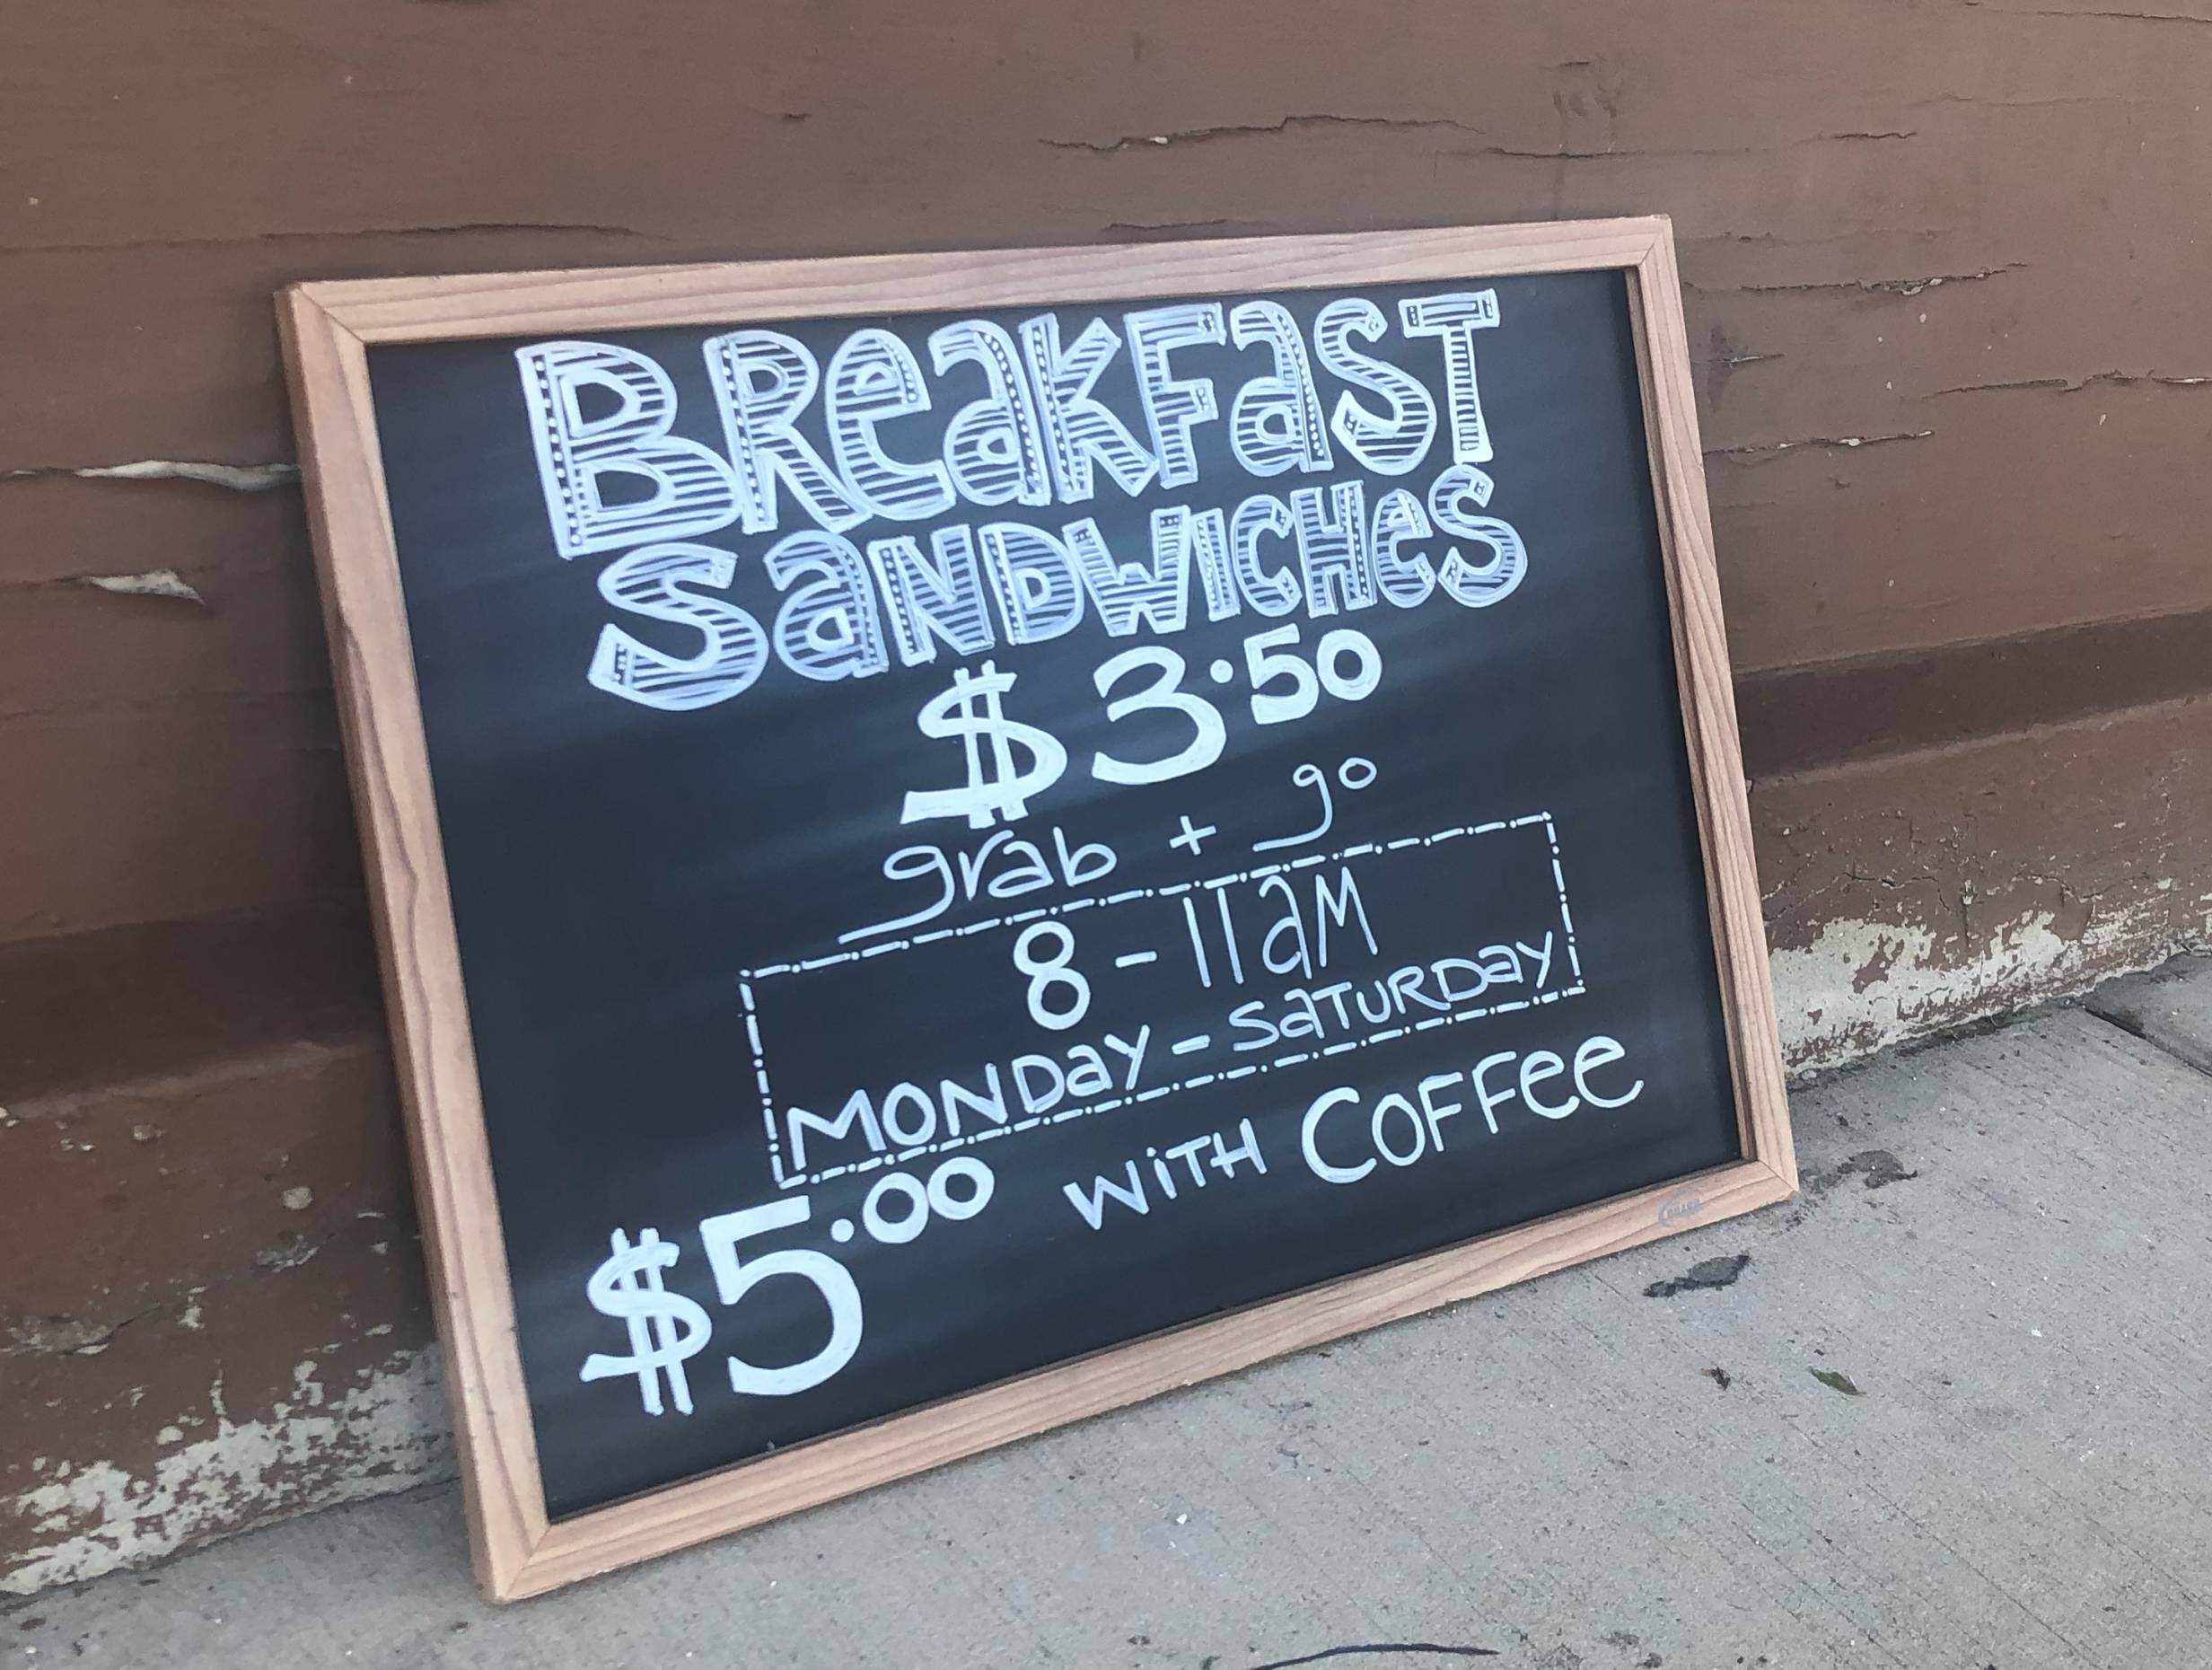 A chalkboard reads: Breakfast Sandwiches with details on hours and pricing. It is leaning against a burgundy building, resting on the sidewalk. Photo by Alyssa Buckley.